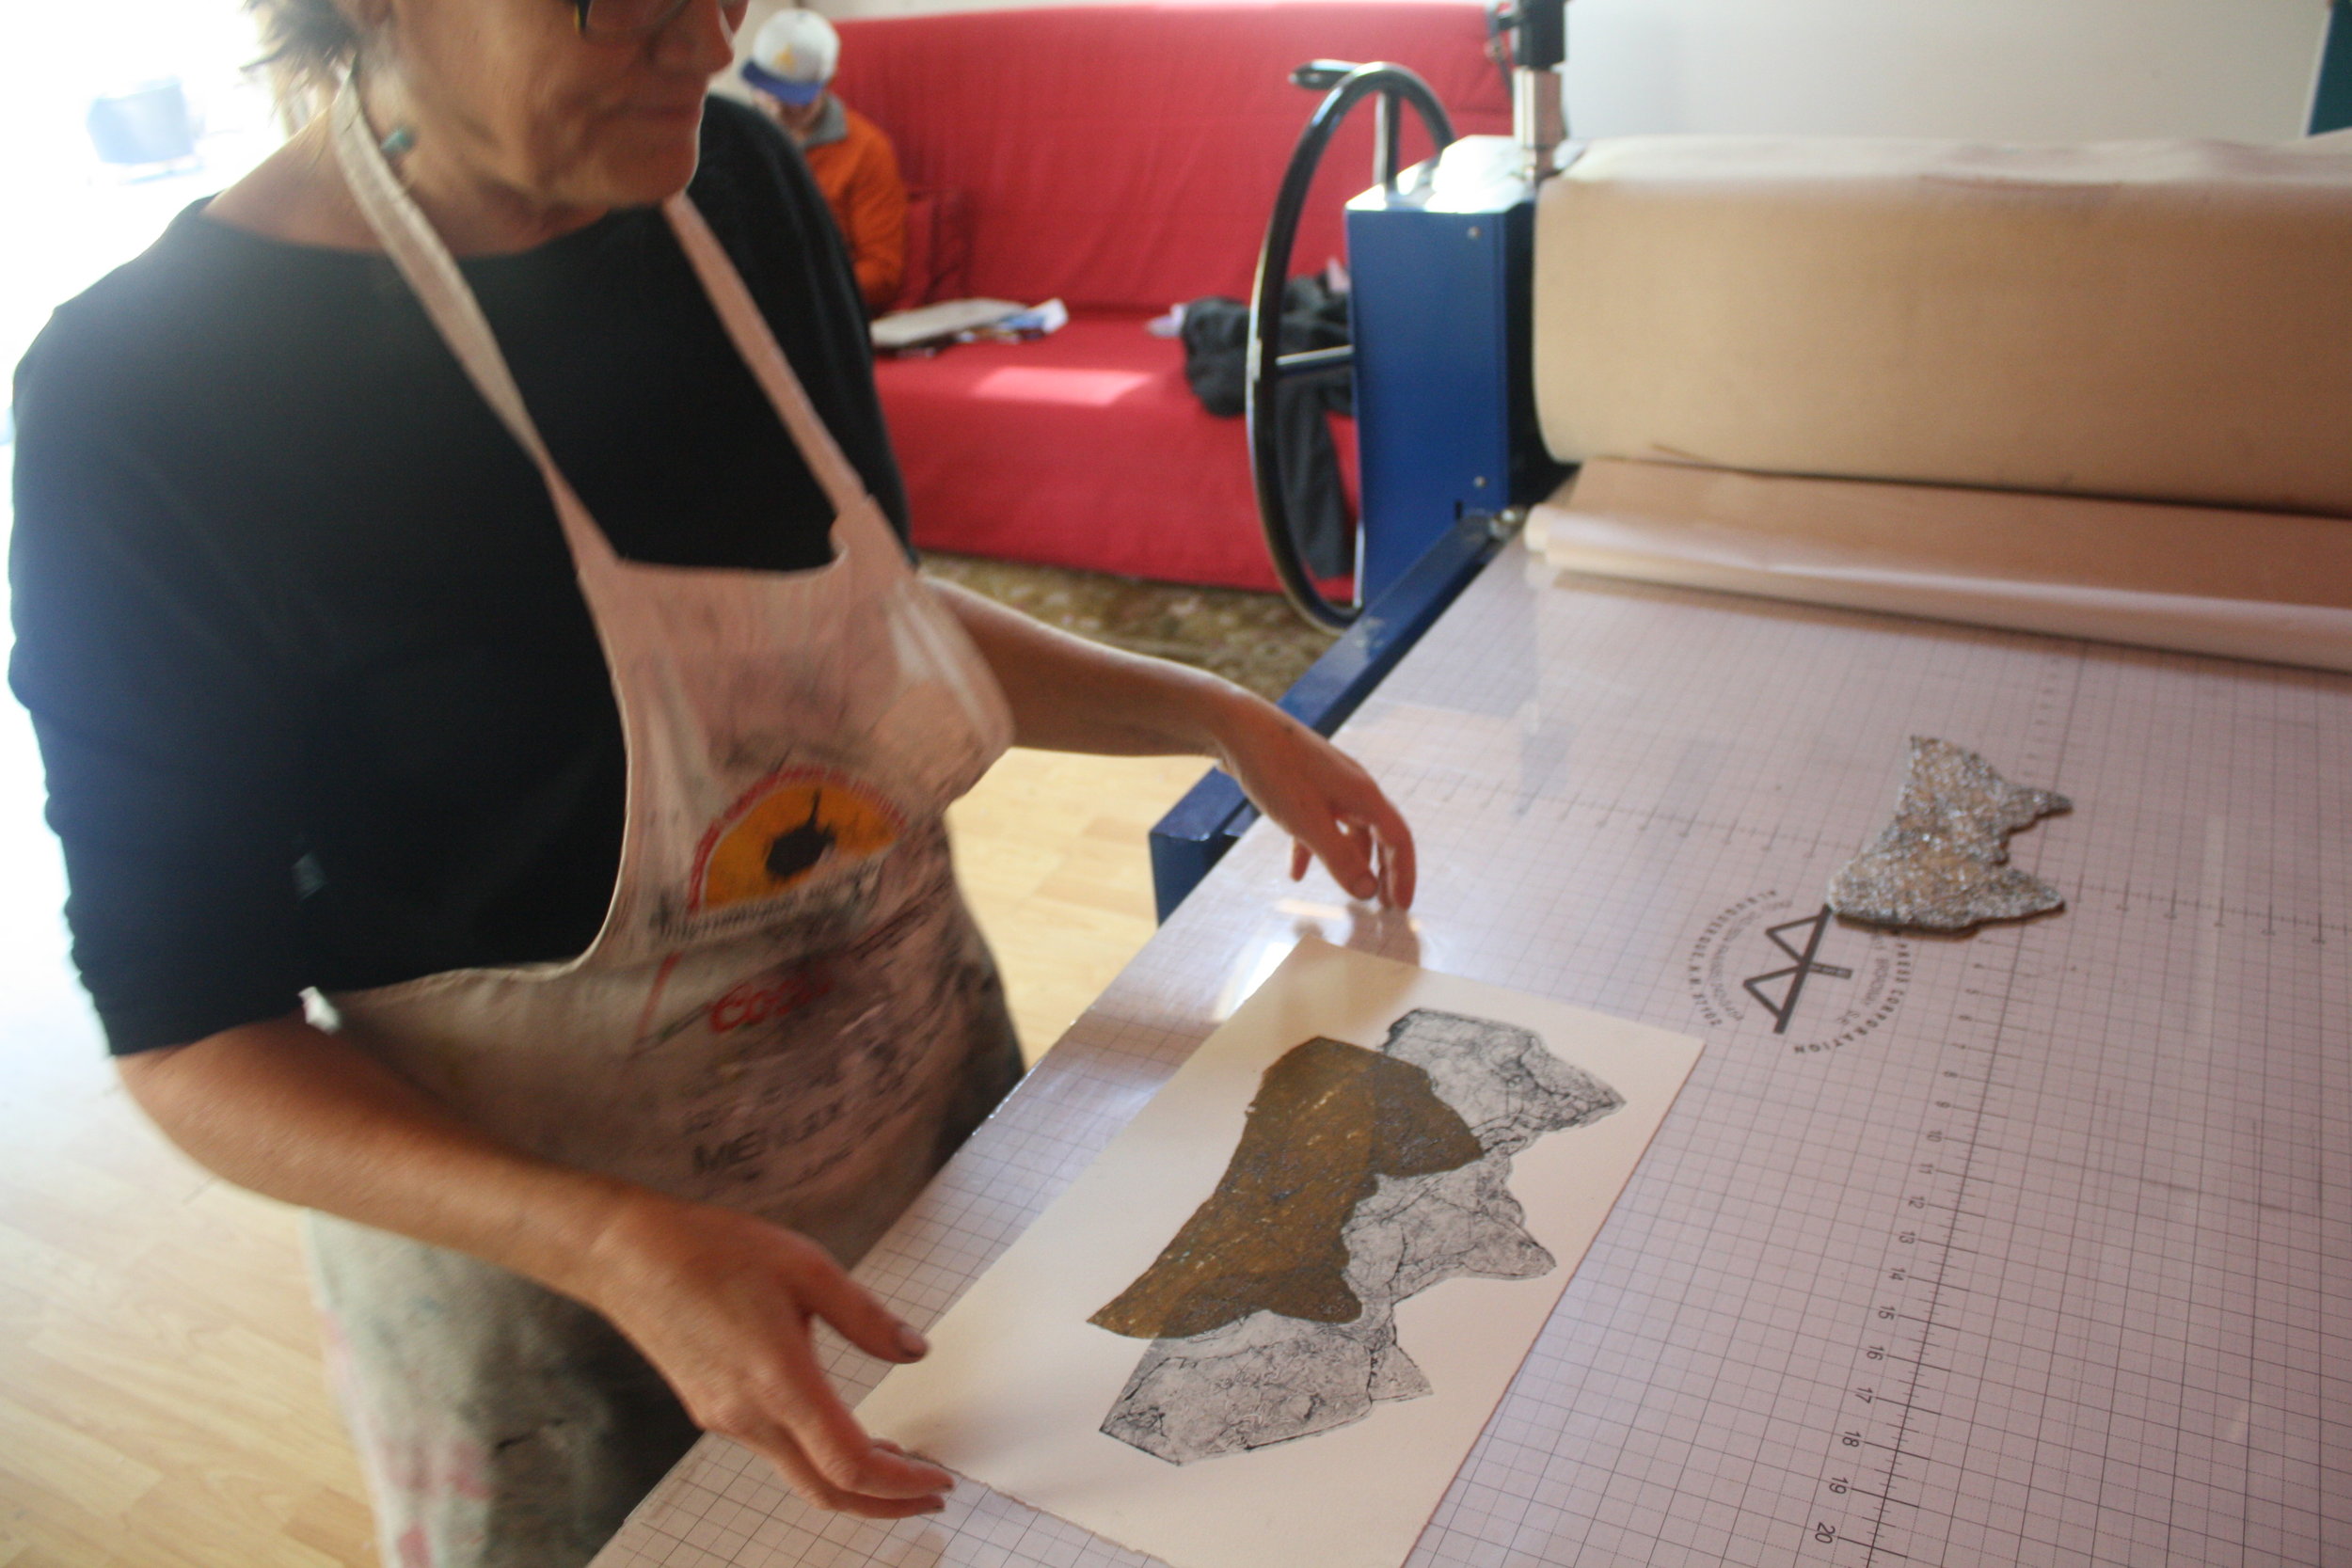 Community Artist Producing Collagraphs in Open Workshop - Fall 2014